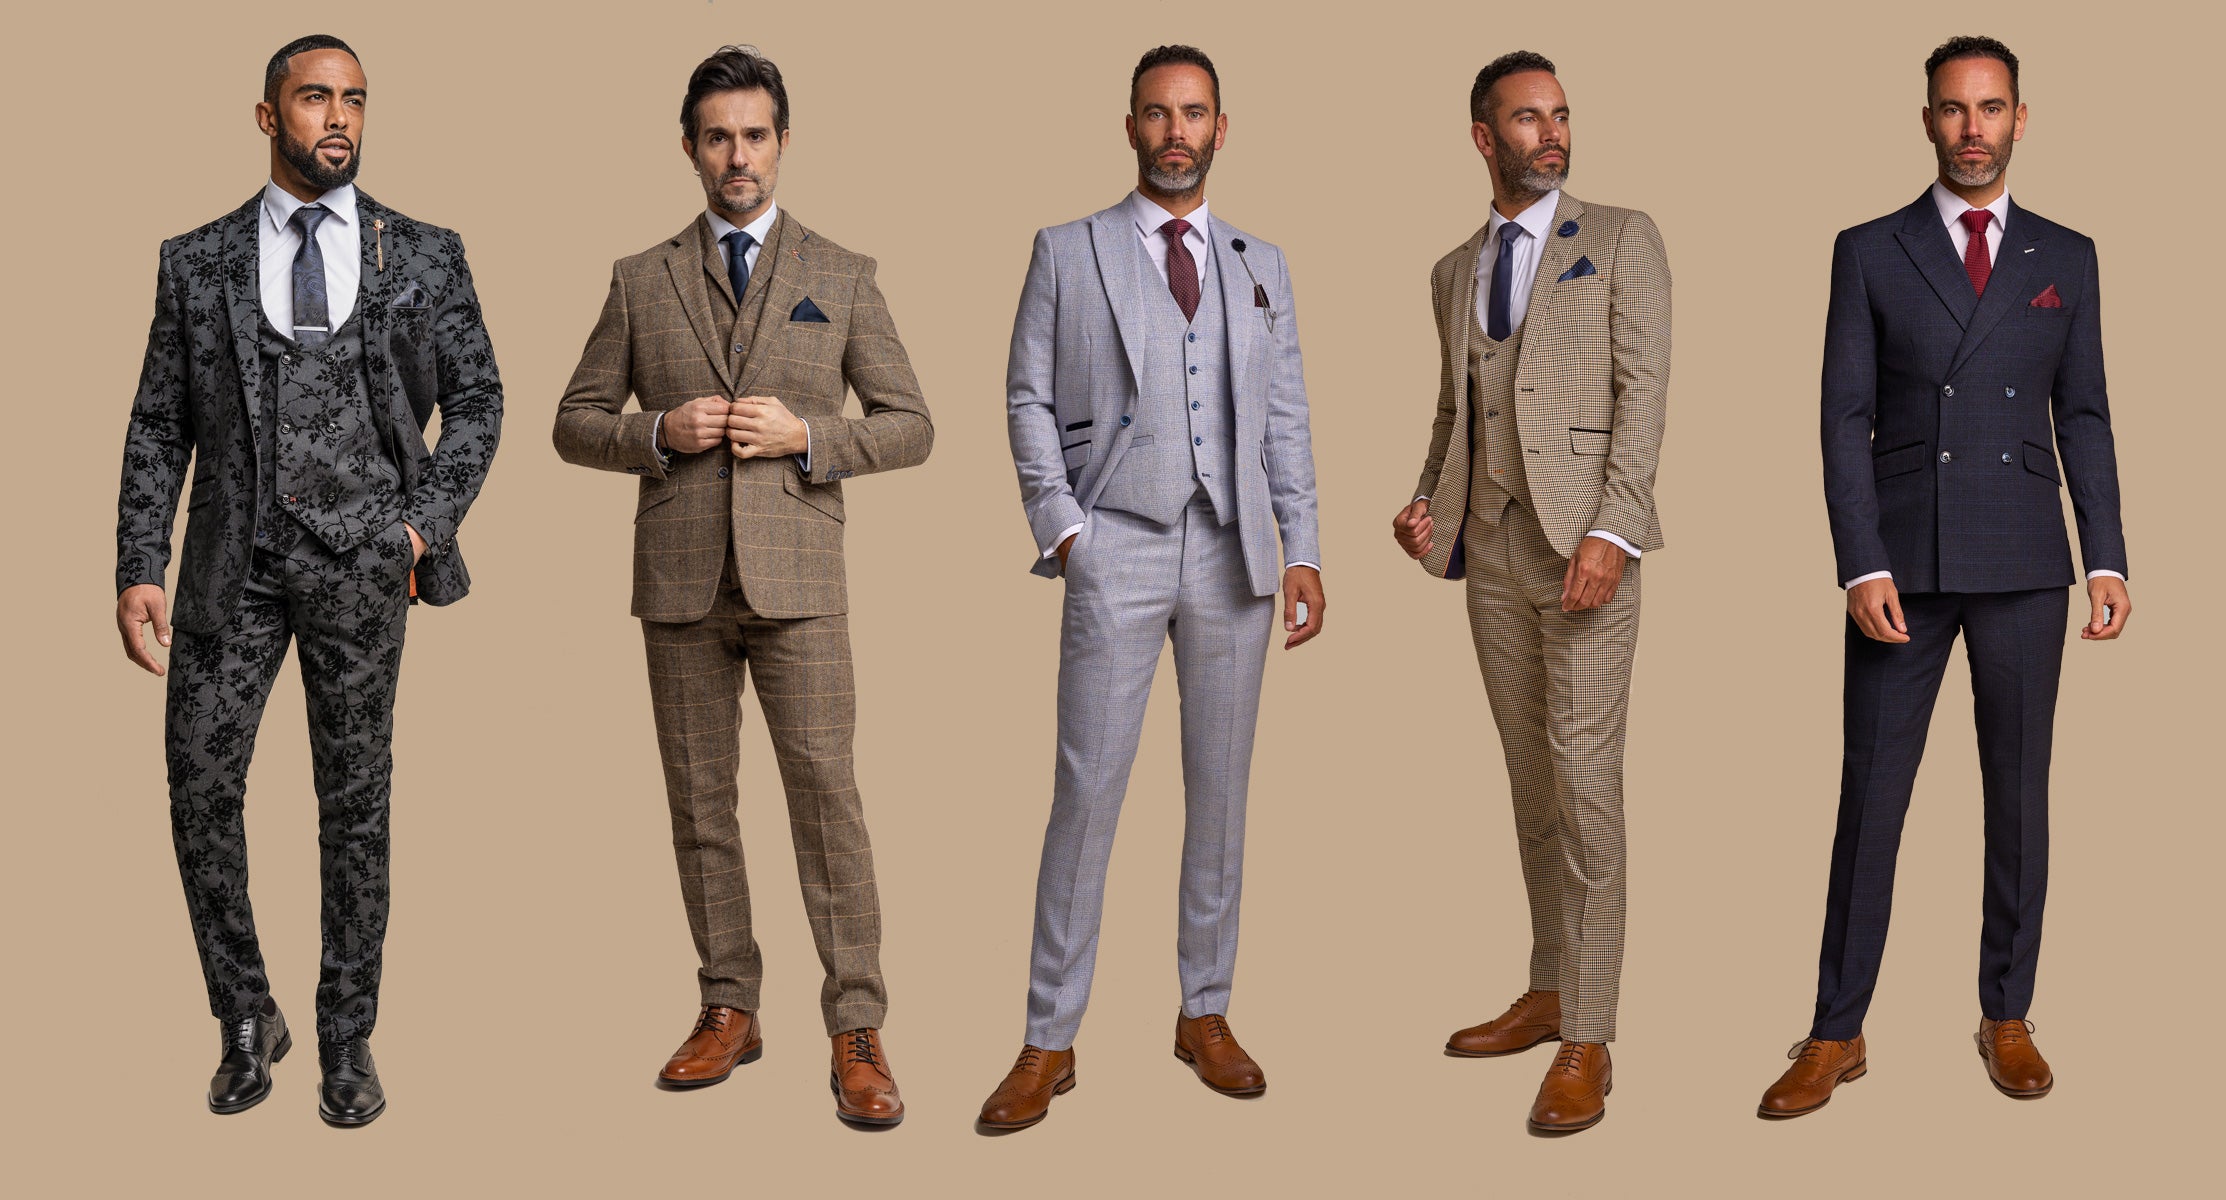 Wedding Suits For Men | Grooms Suit For Wedding | Swagger & Swoon